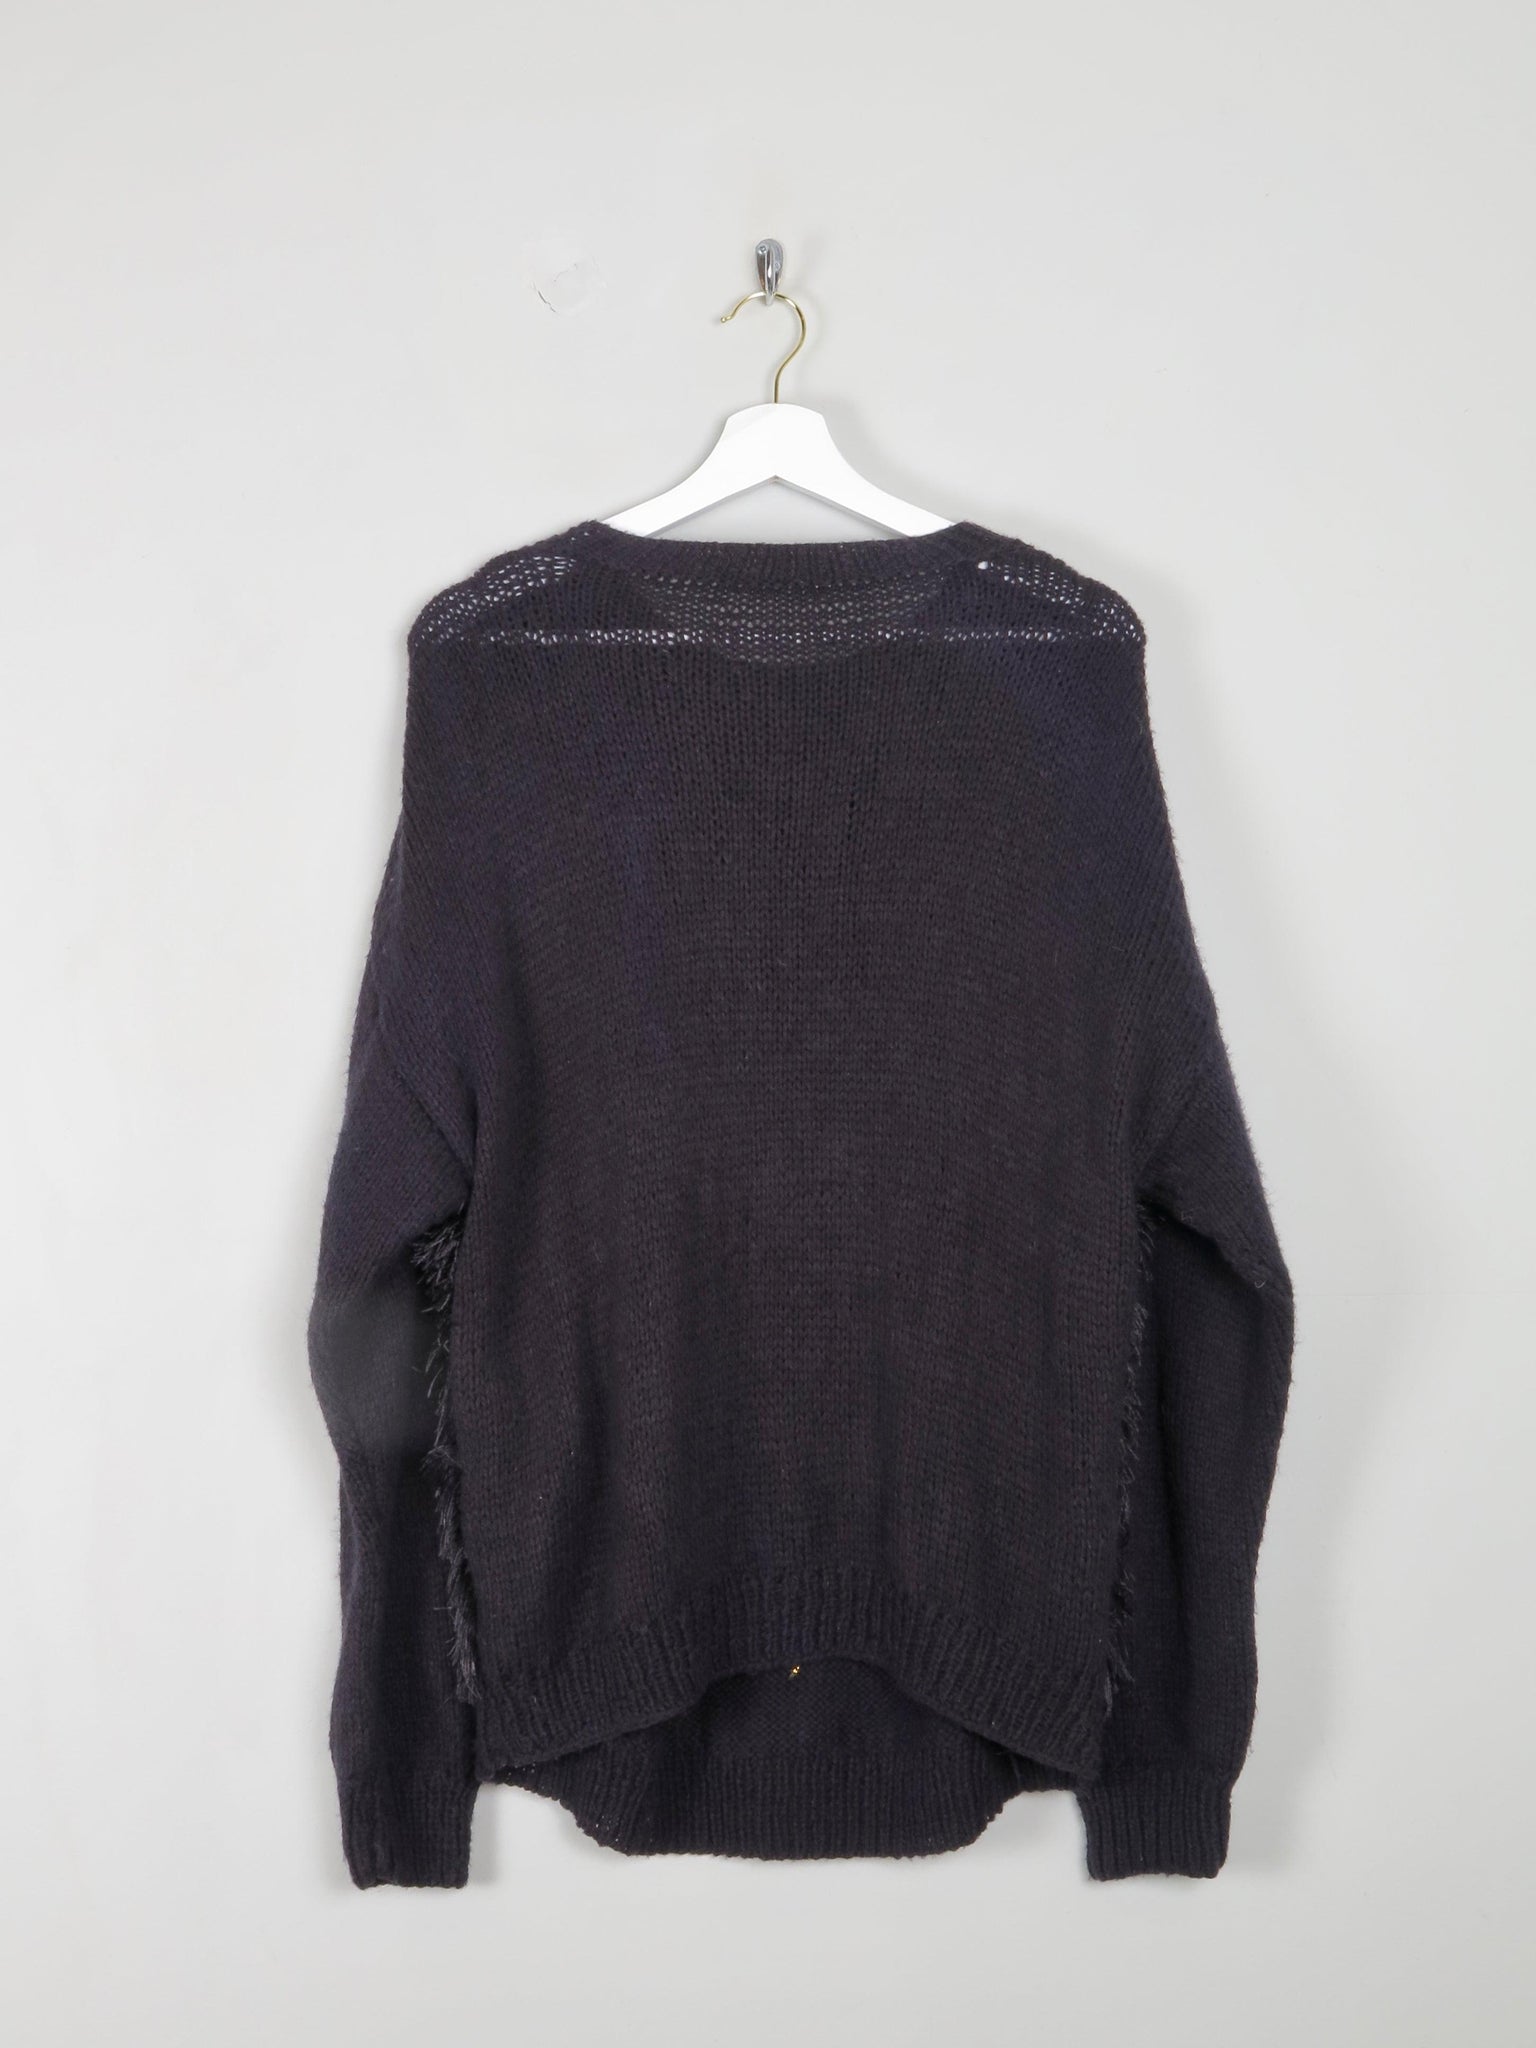 Women's Black Jumper With Beads S-L - The Harlequin